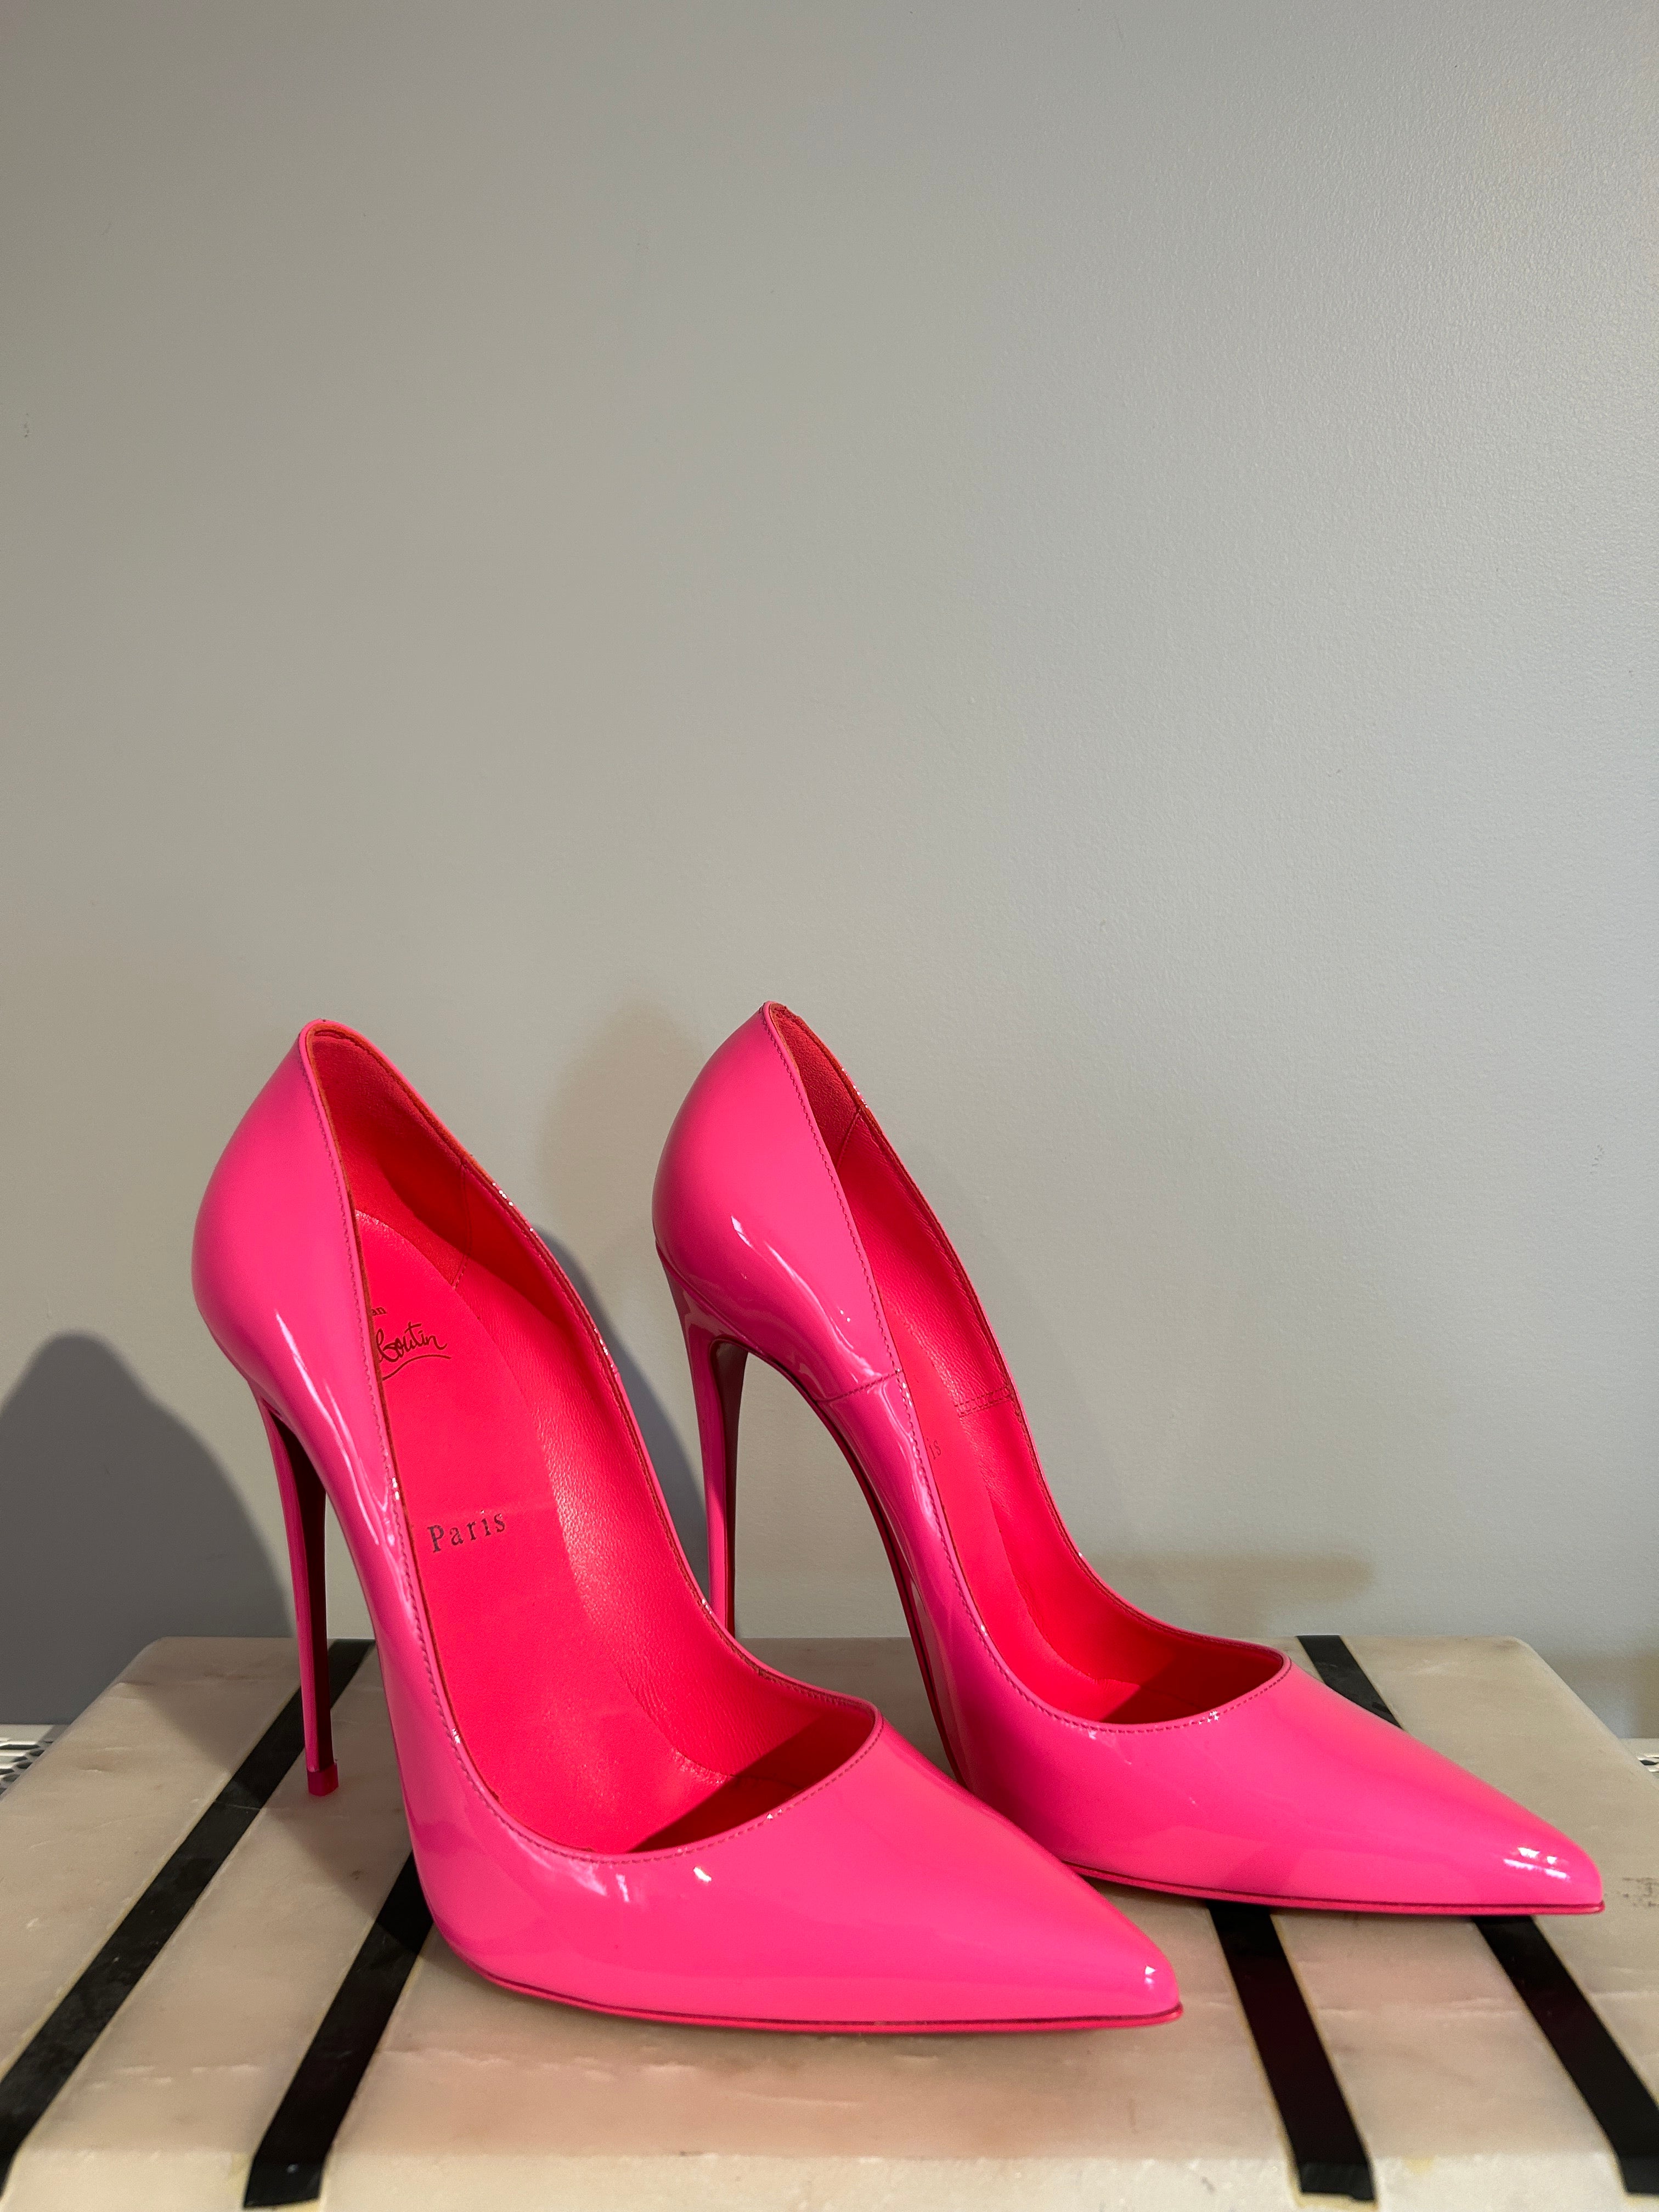 Christian Louboutin, Shoes, Authentic Christian Louboutin So Kate Patient  Leather Pumps Red Bottoms